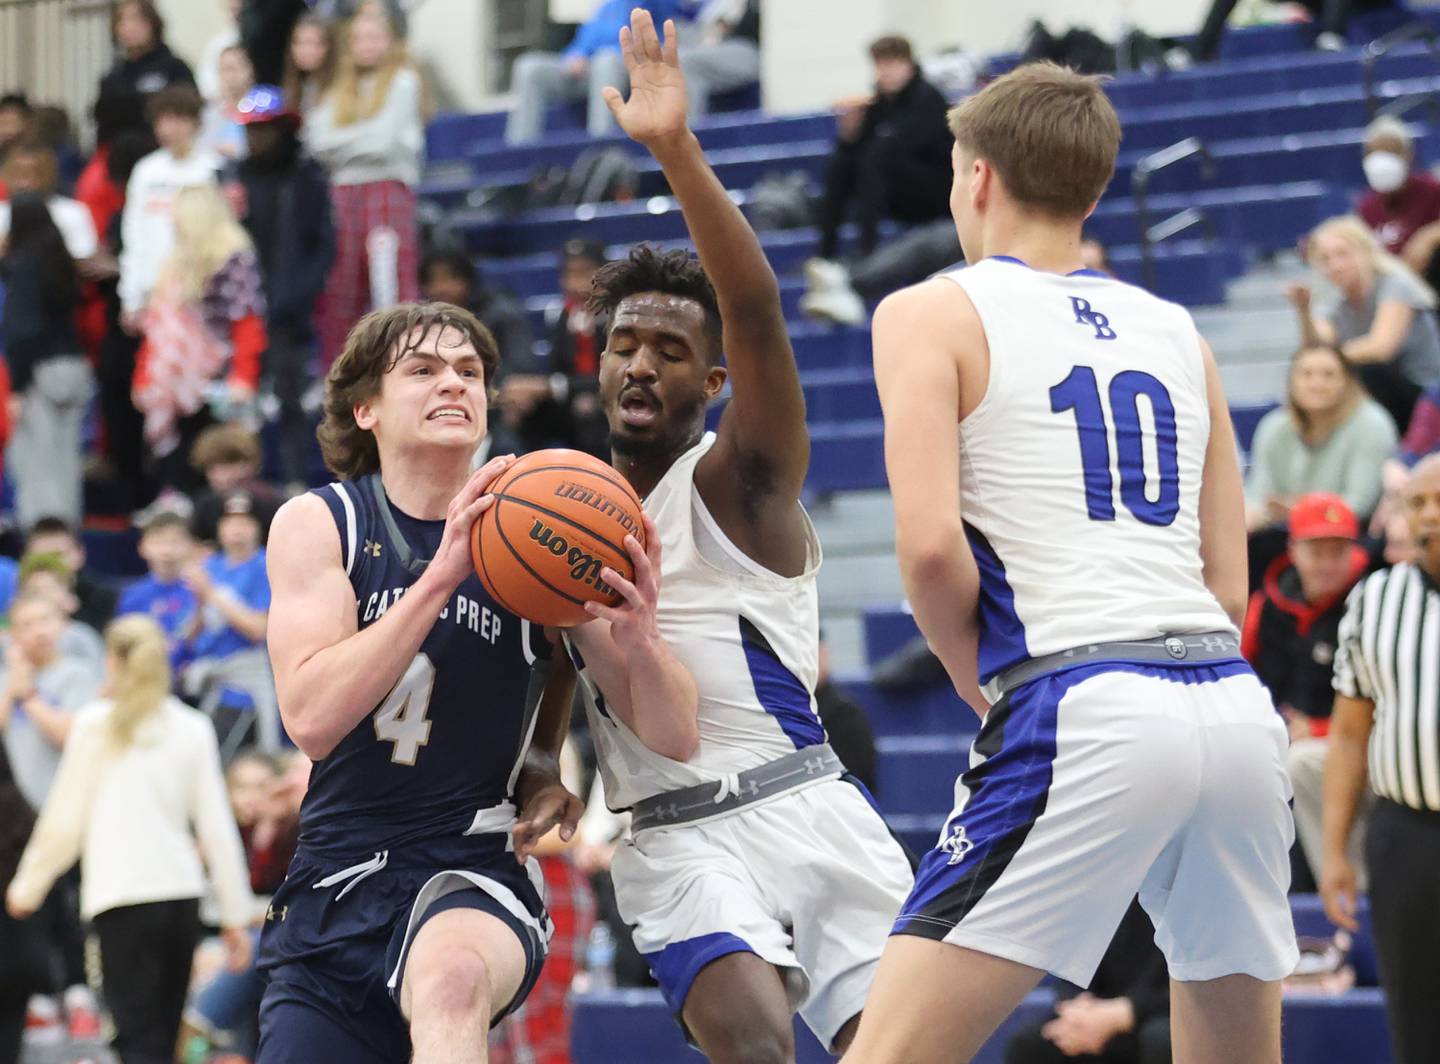 ICCP's Dean O'Brien (4) drives to the basket during the boys varsity basketball game between IC Catholic Prep and Riverside Brookfield in Riverside on Tuesday, Jan. 24, 2023.